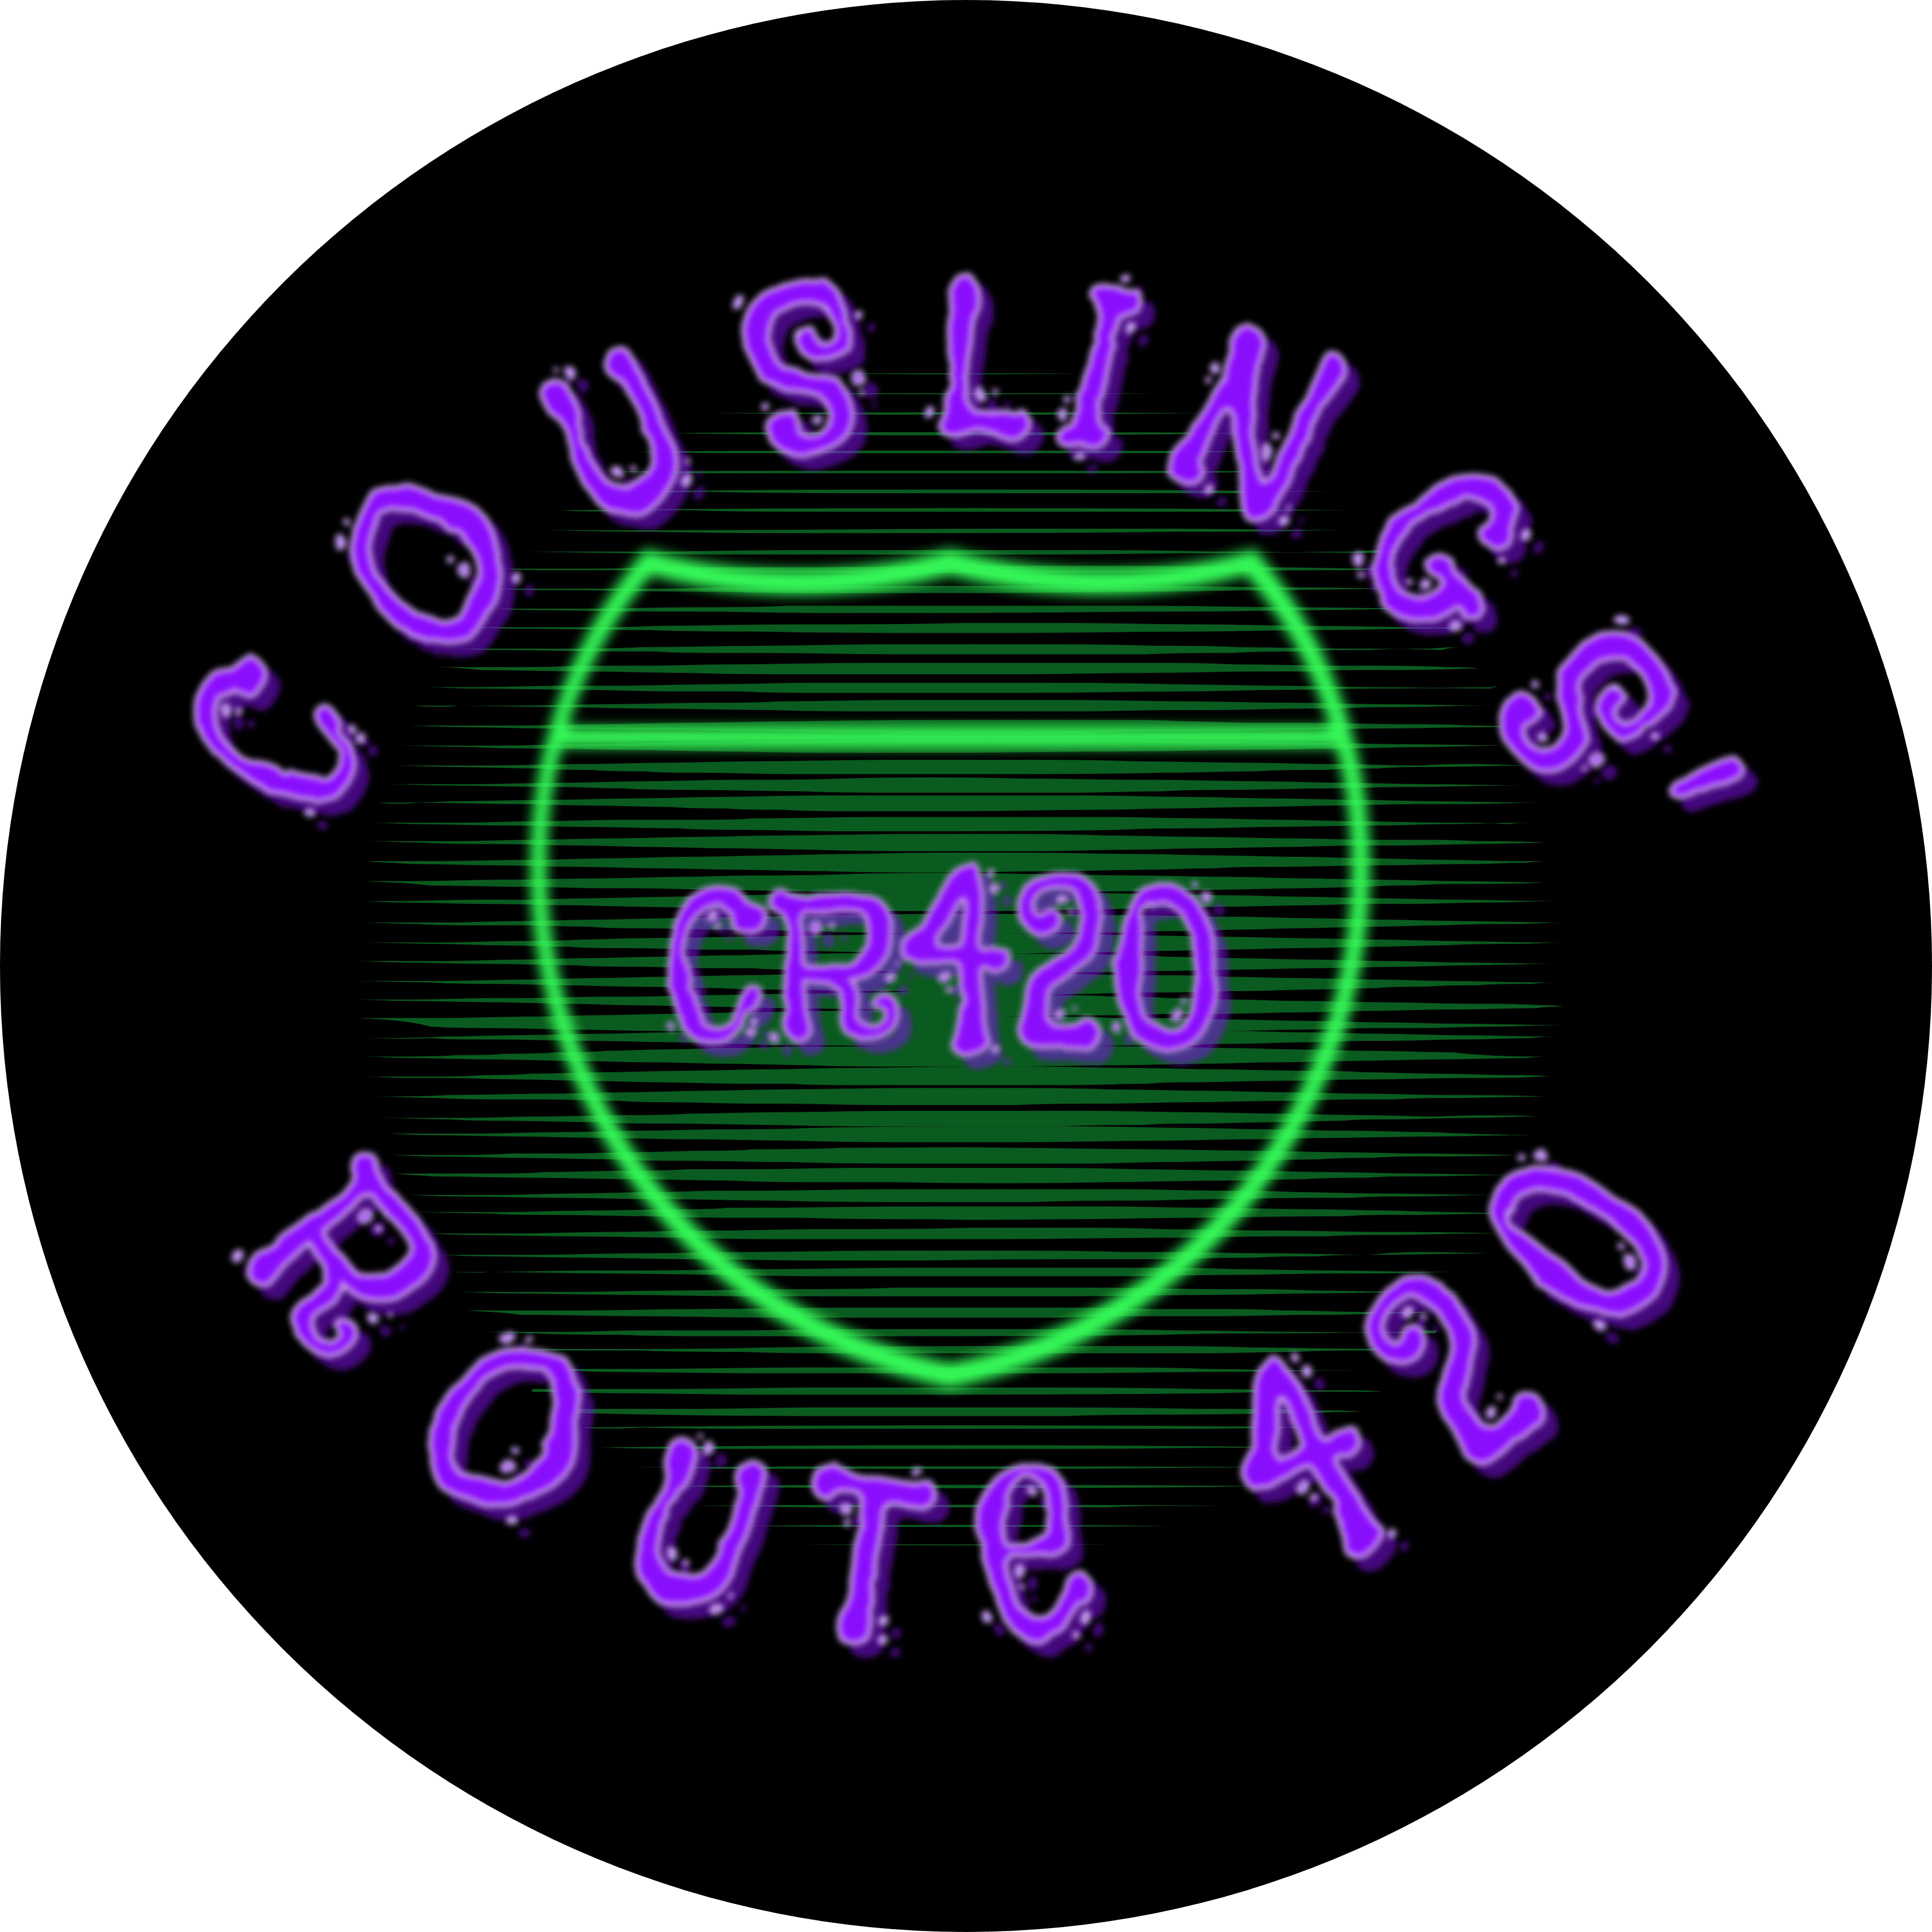 Couslings' Route 420